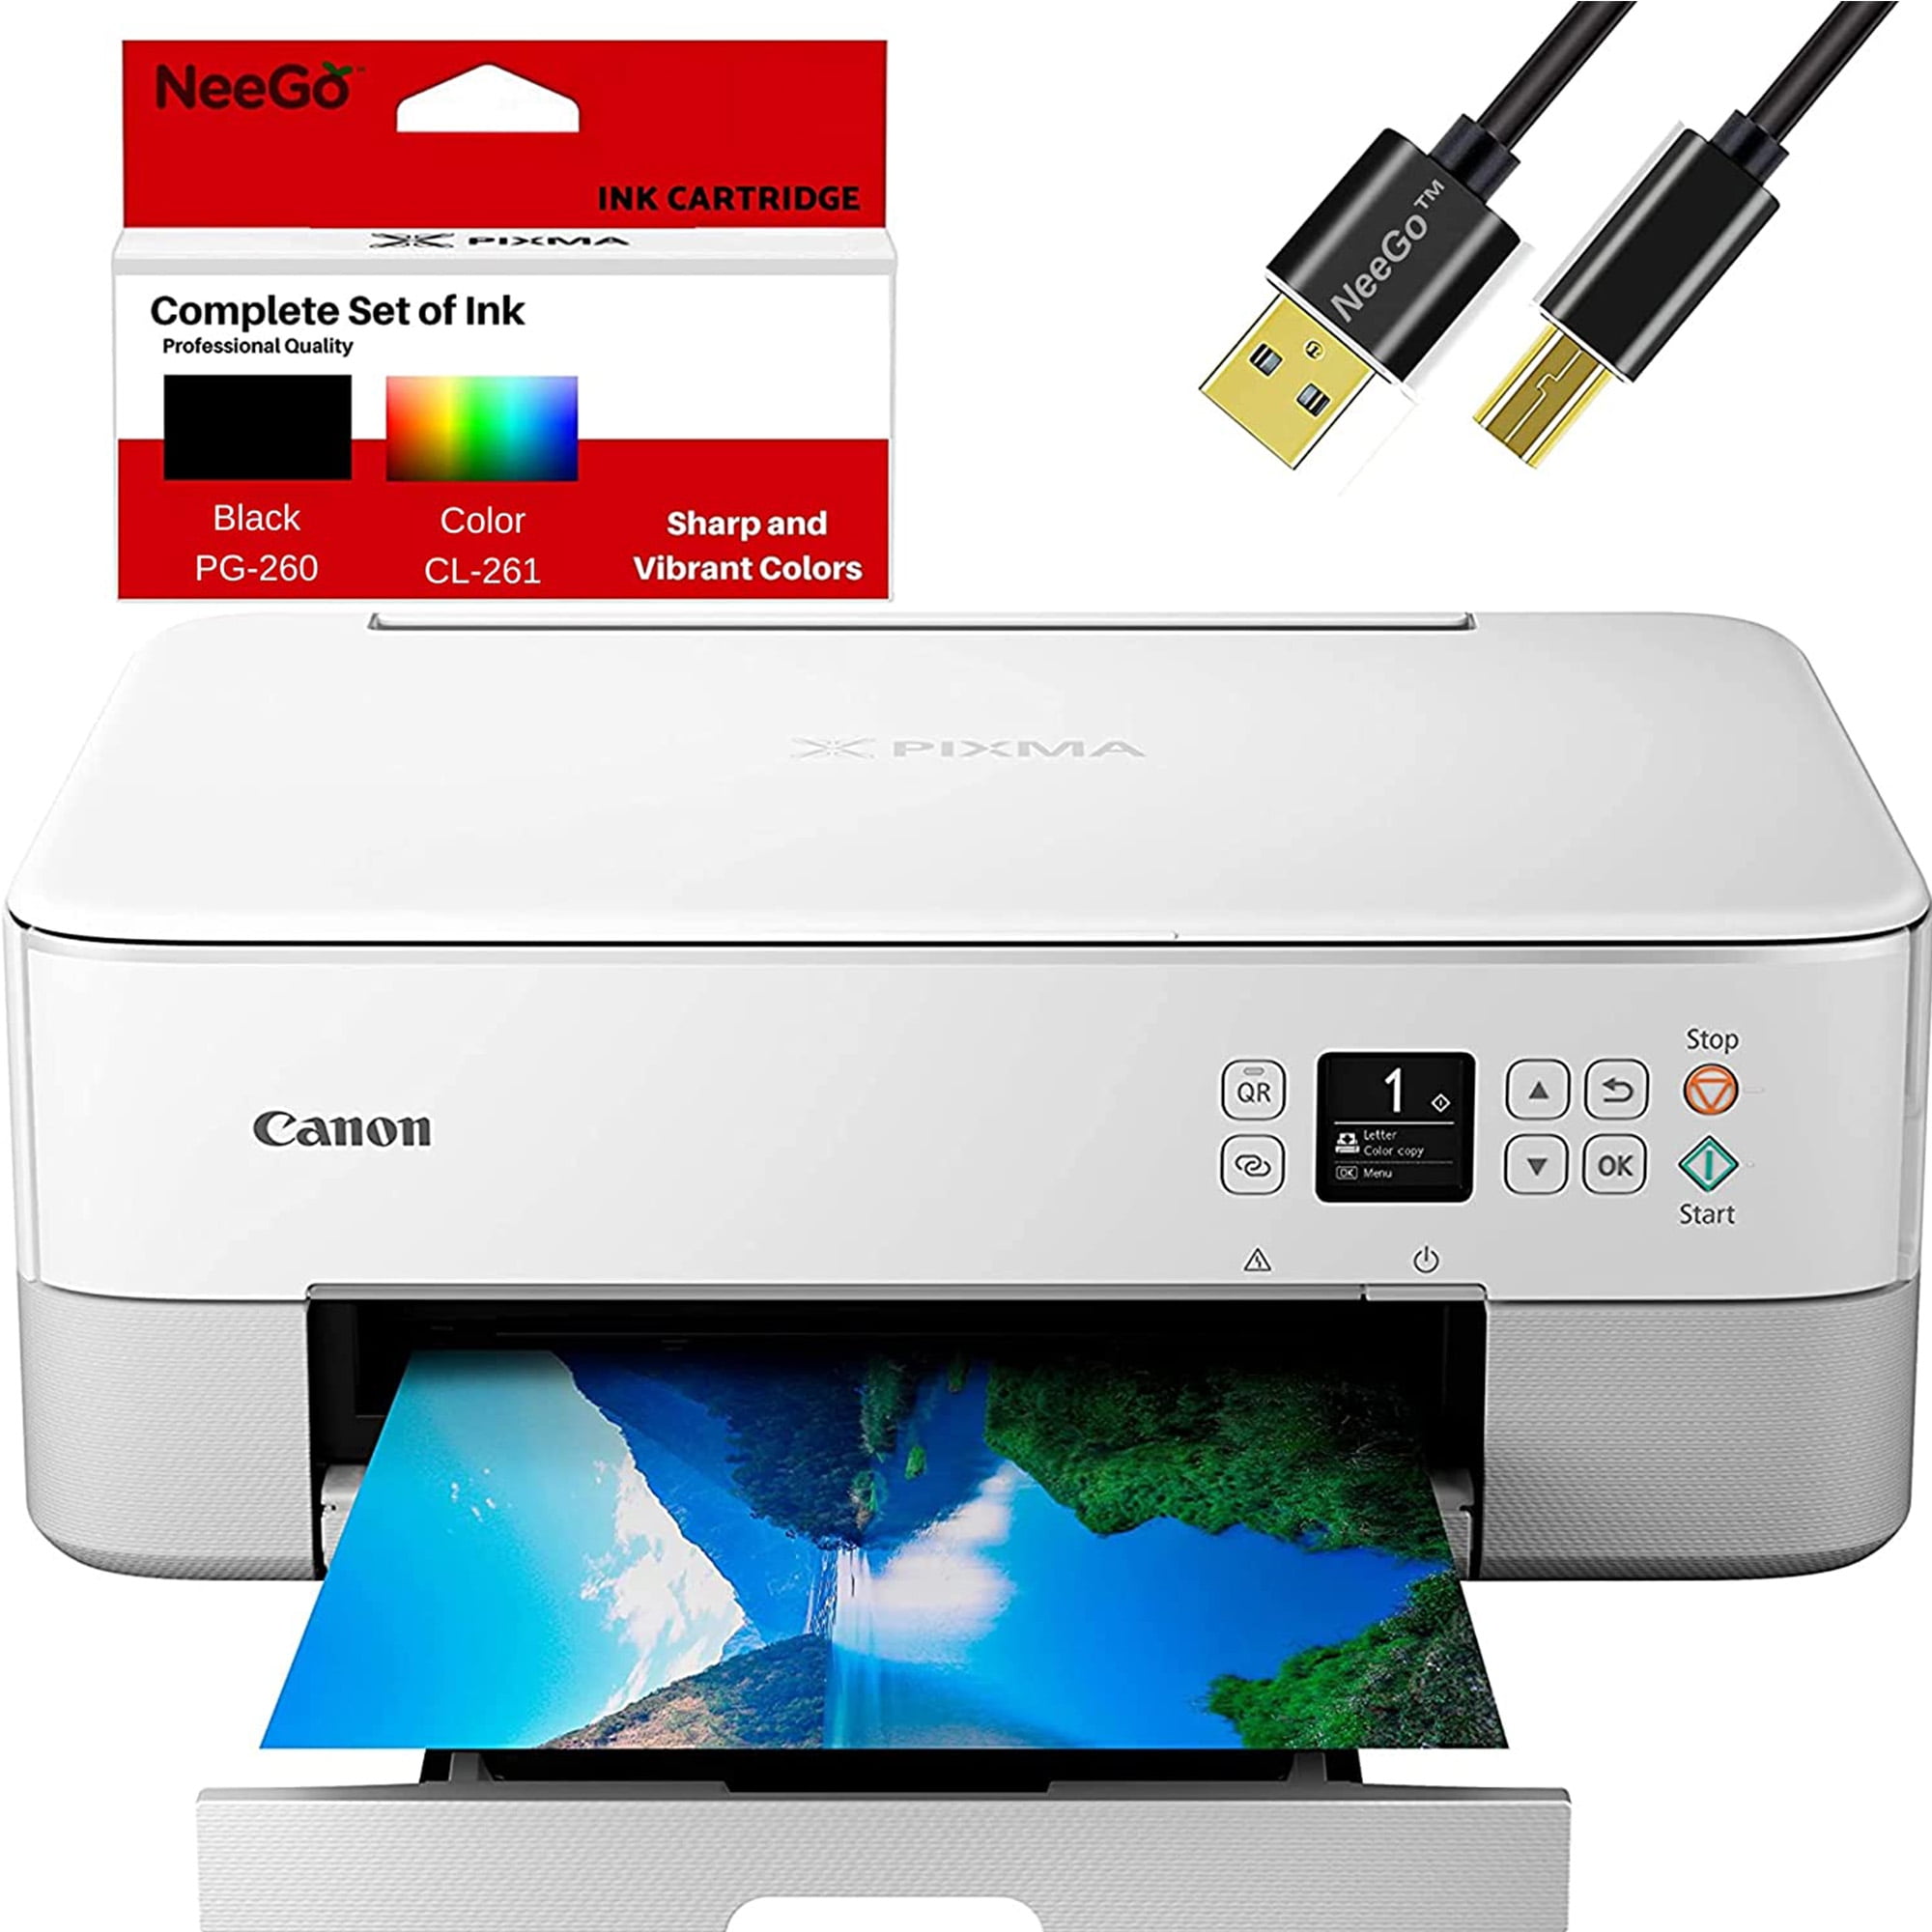 Neego Canon TS6420 Printer Scanner Copier All-in-One with Ink and 6 Ft Cable - Walmart.com